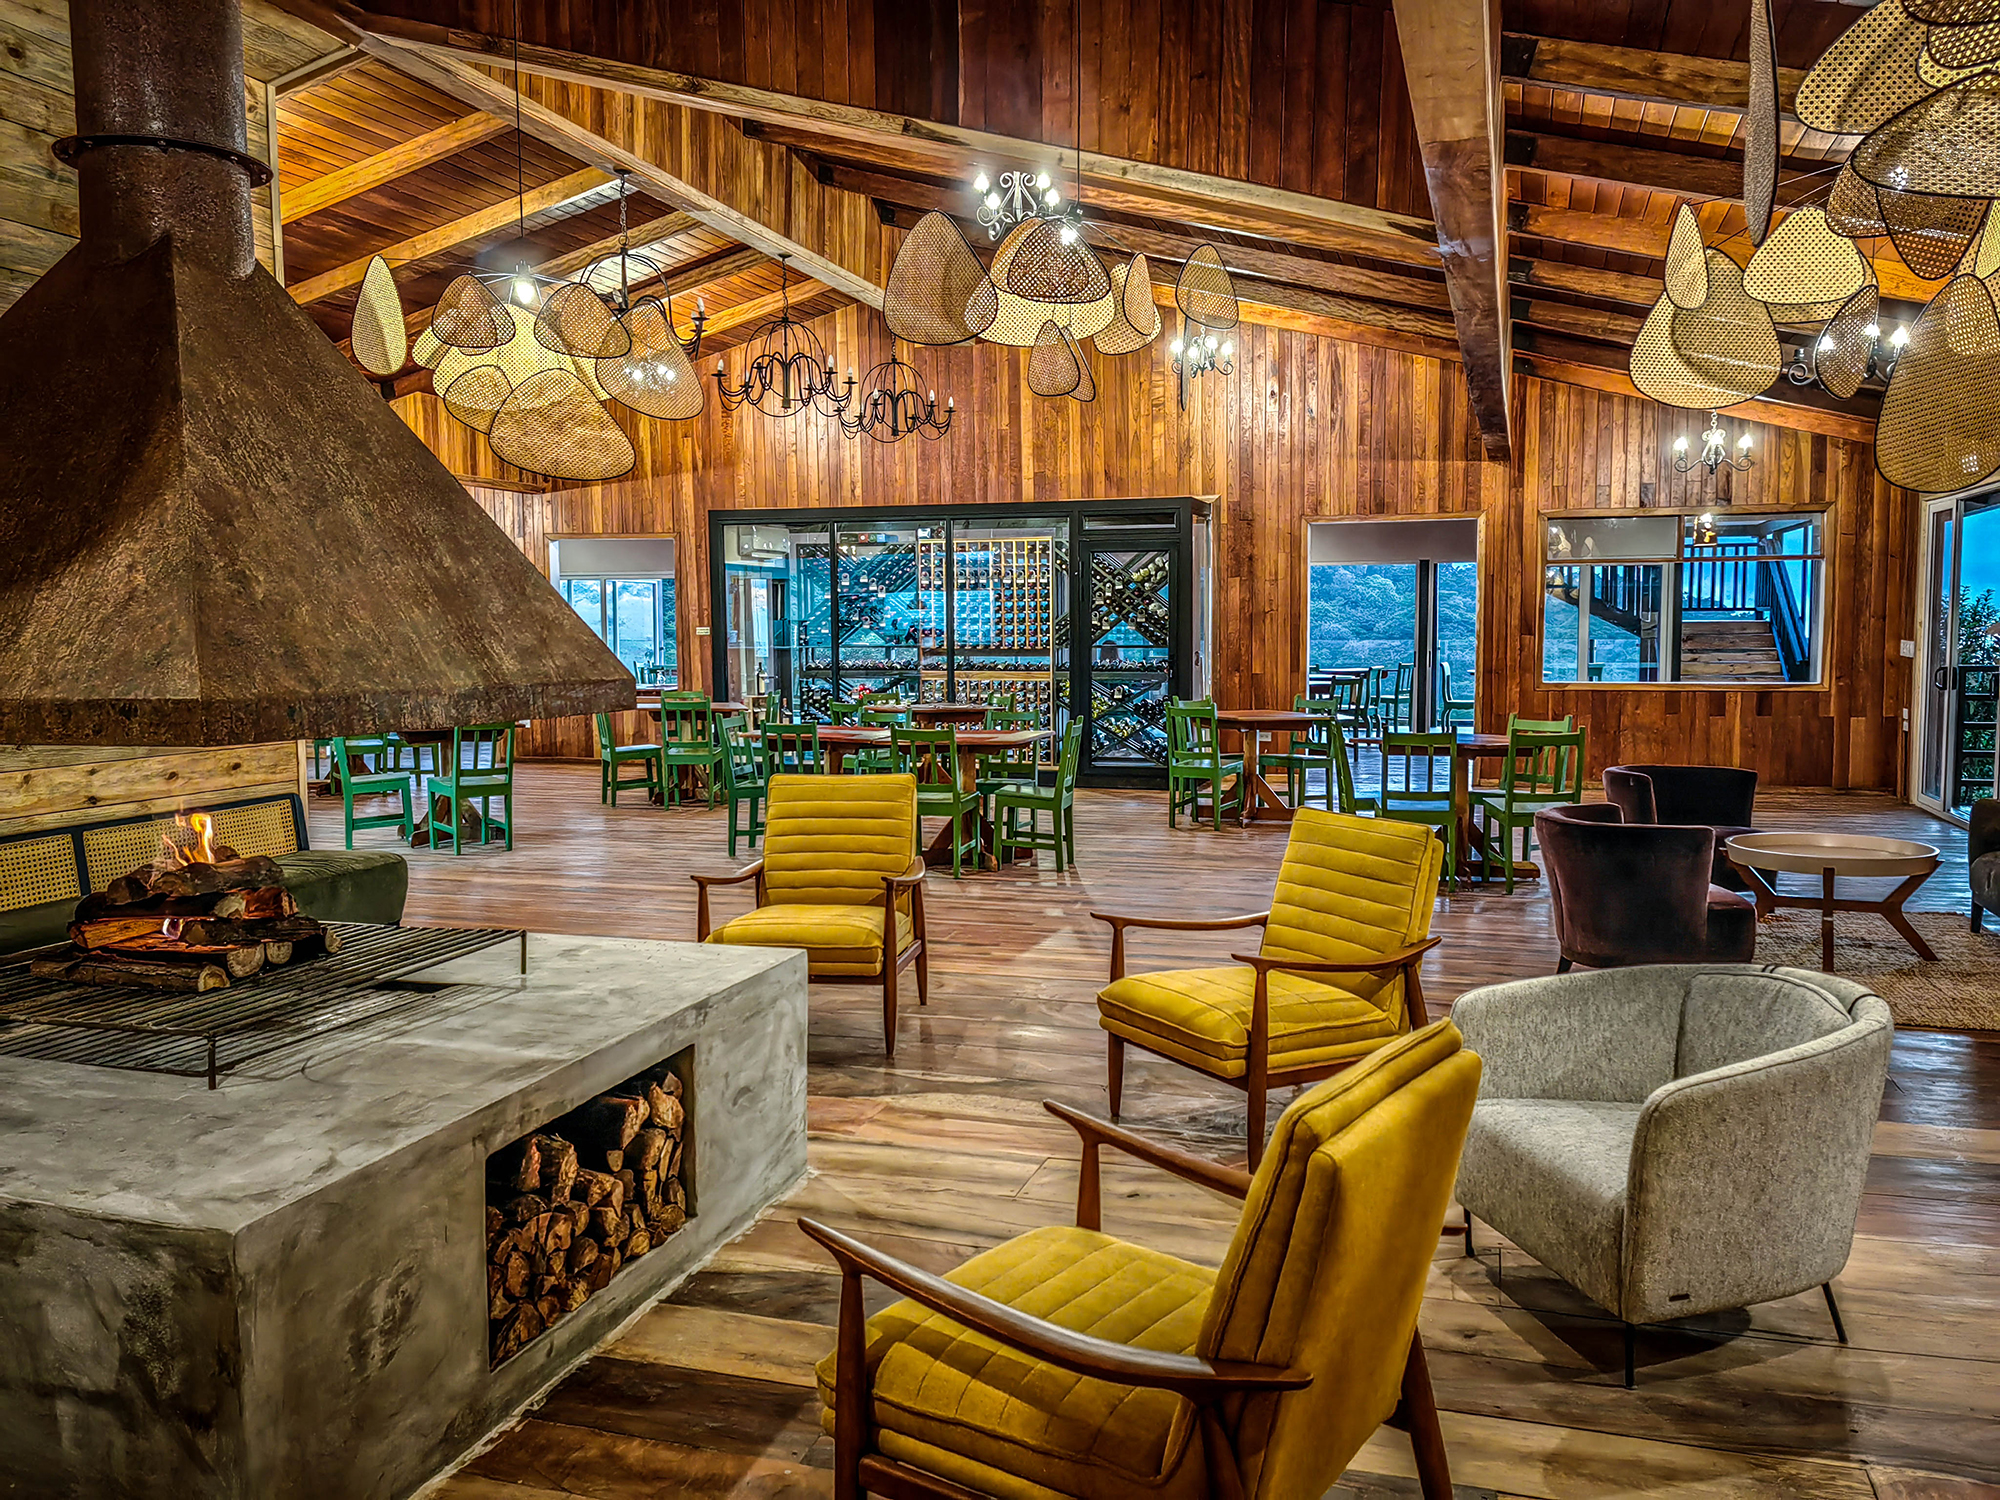 Experience luxury and relax in the tranquility of Cloud Forest Lodge.